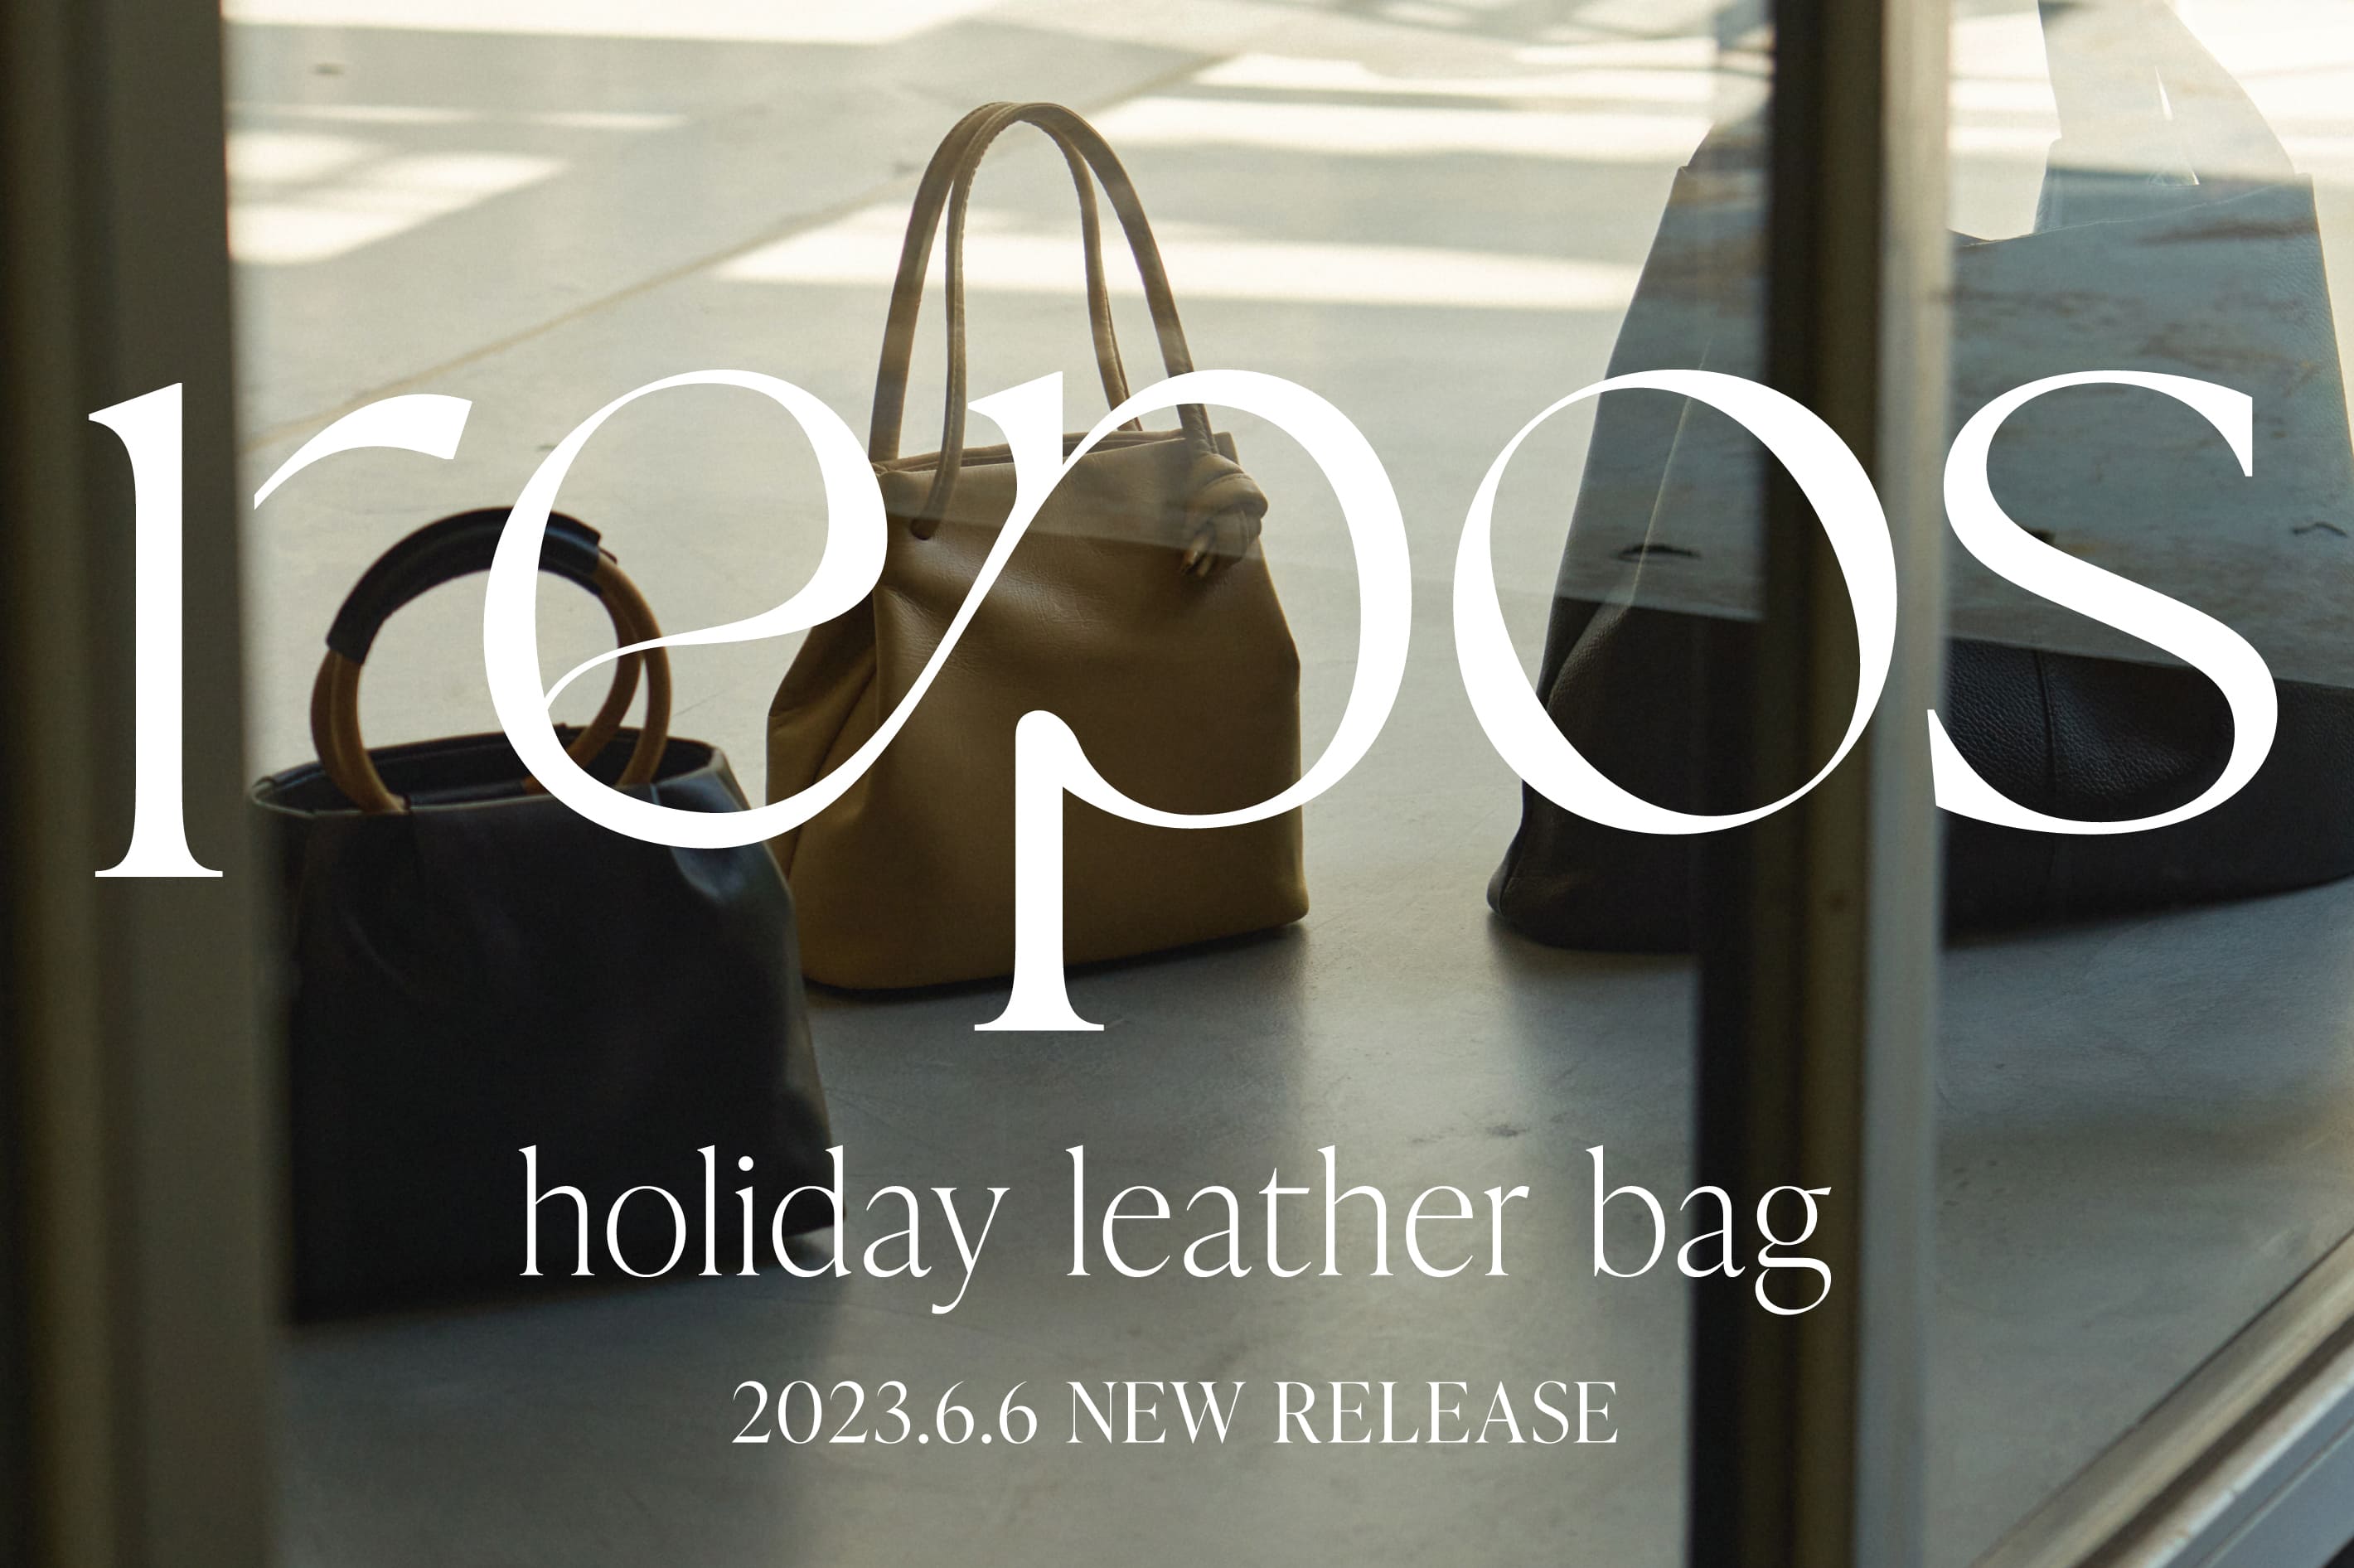 russet 6/6(tue)NEW RELEASE！repos -holiday leather bag-